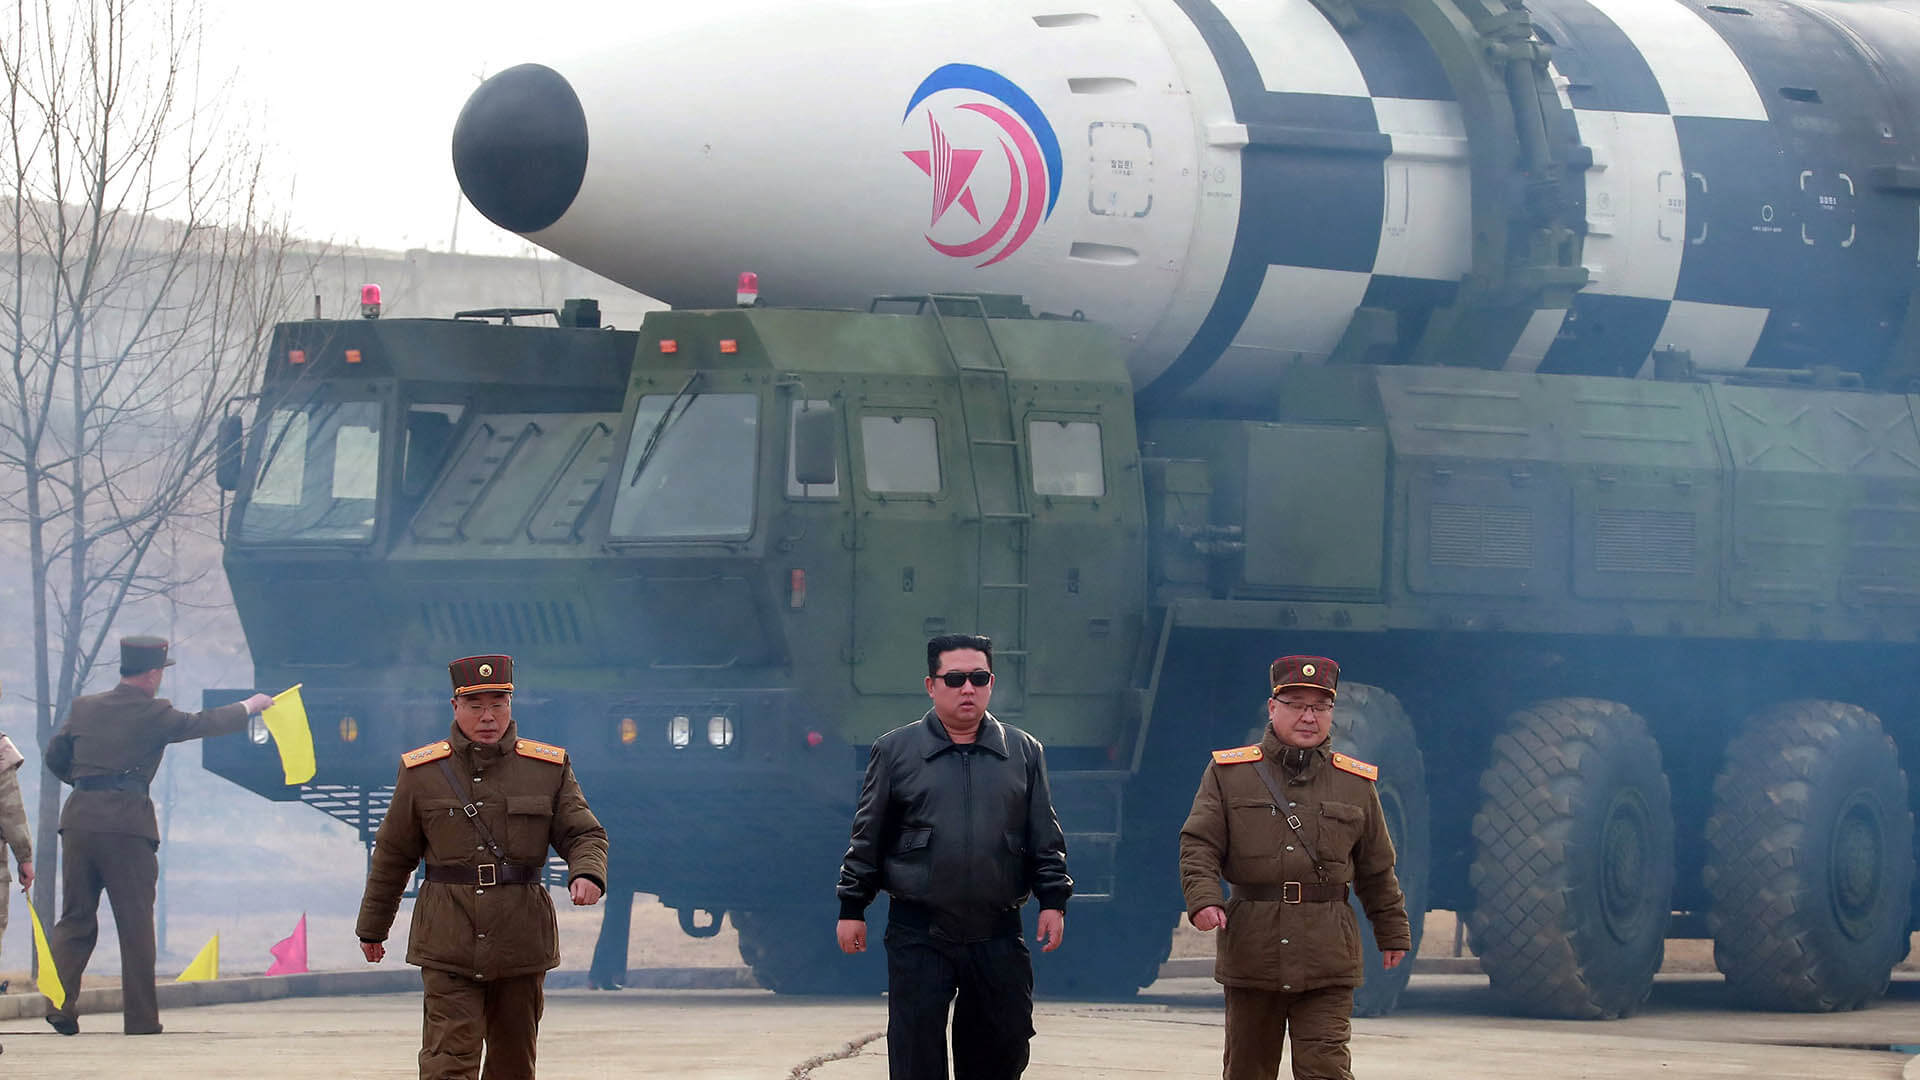 Kim Warns of North Korea’s “Overwhelming Military Power” After Largest-Ever Missile Launch